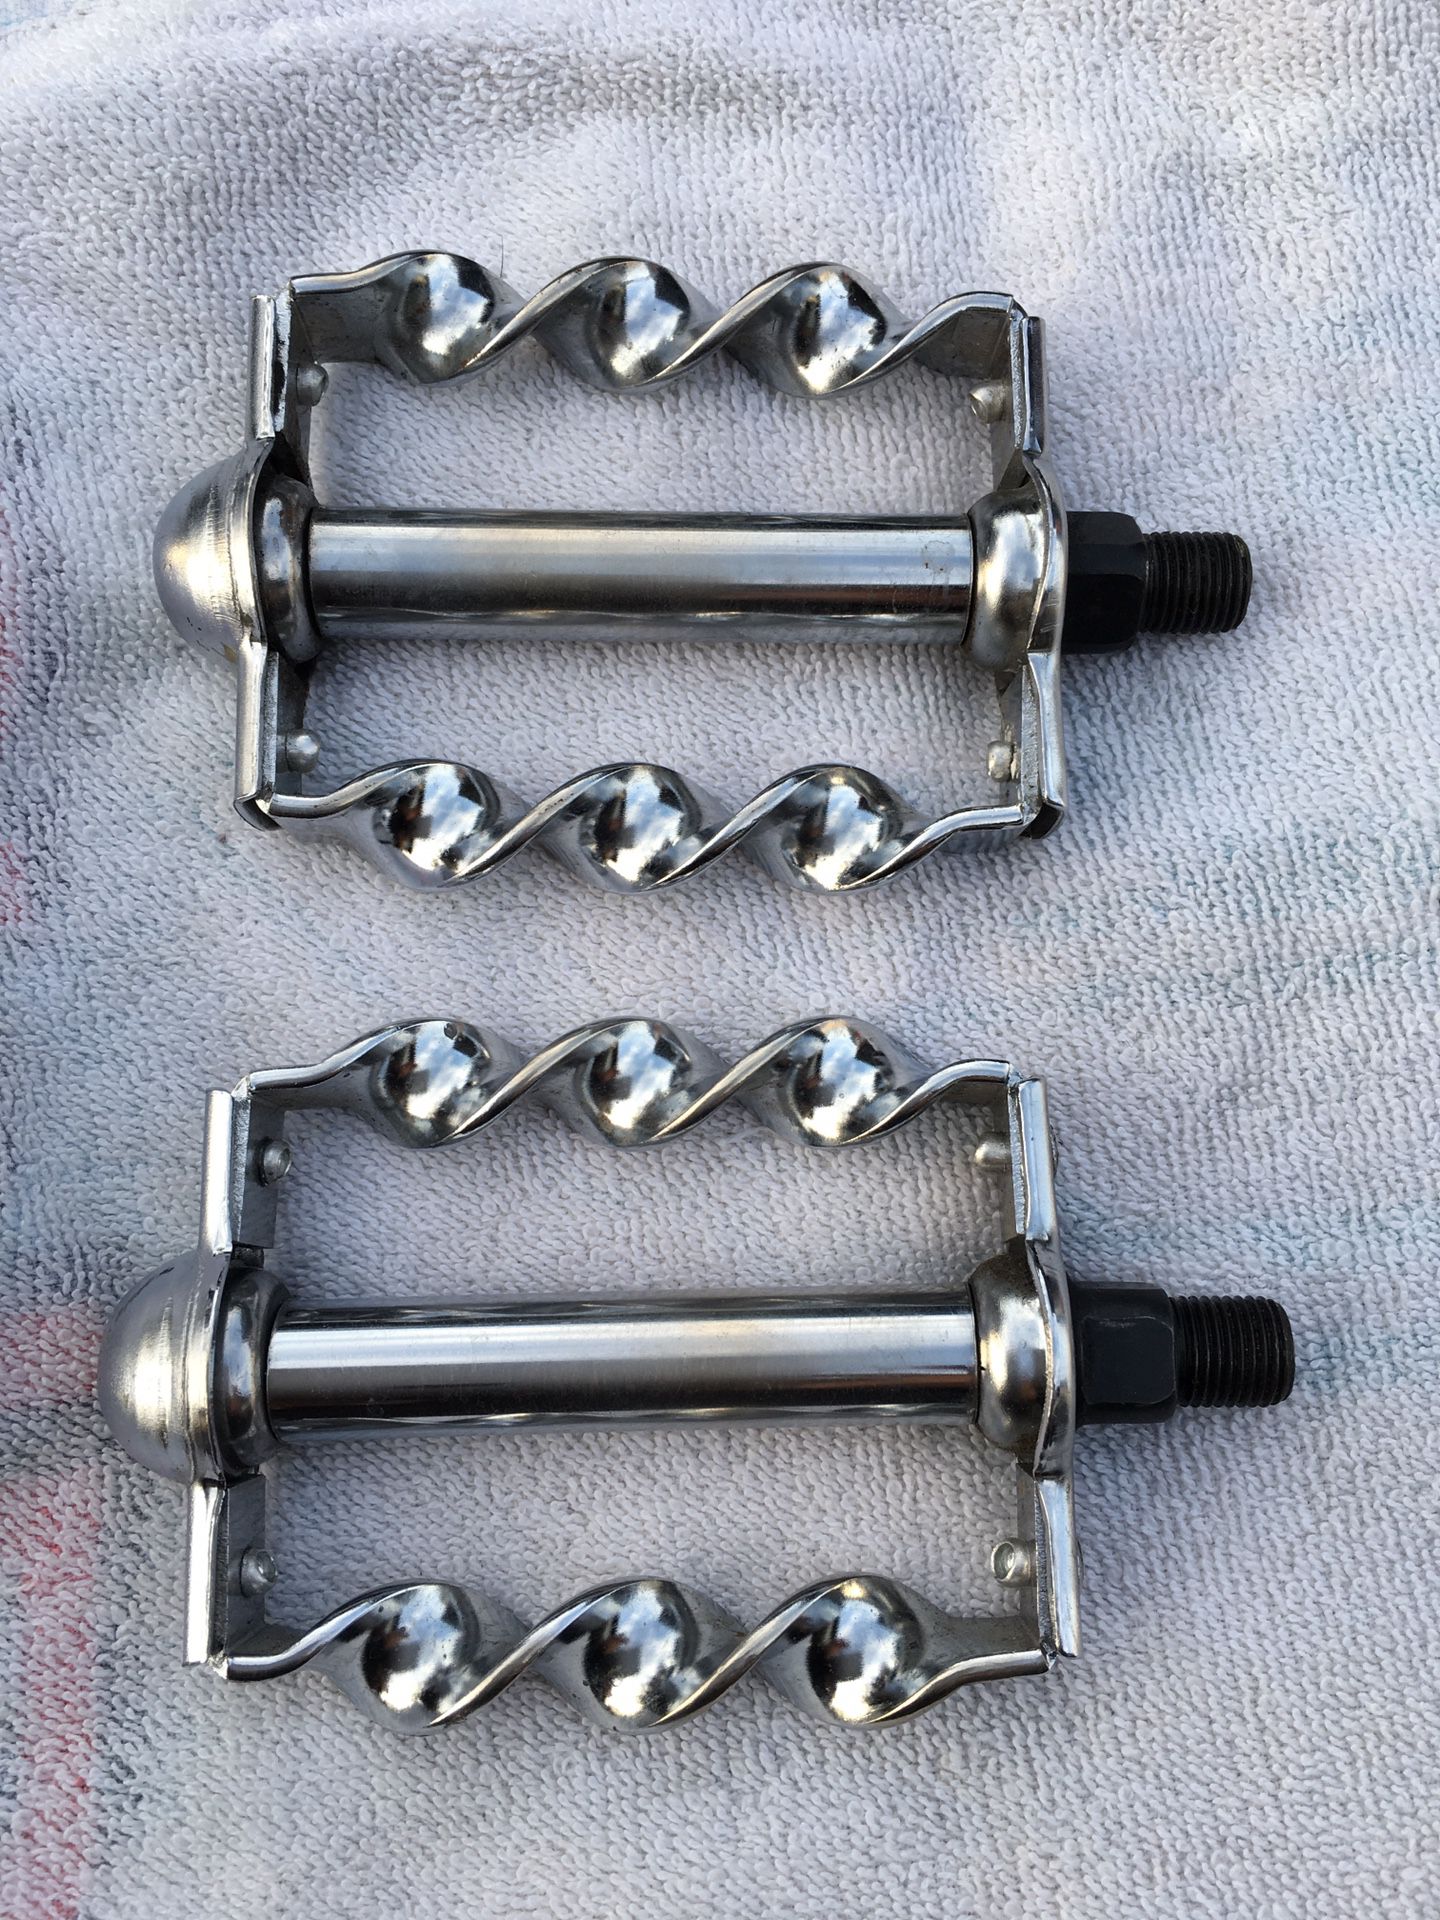 Lowrider Twisted Chrome Pedals